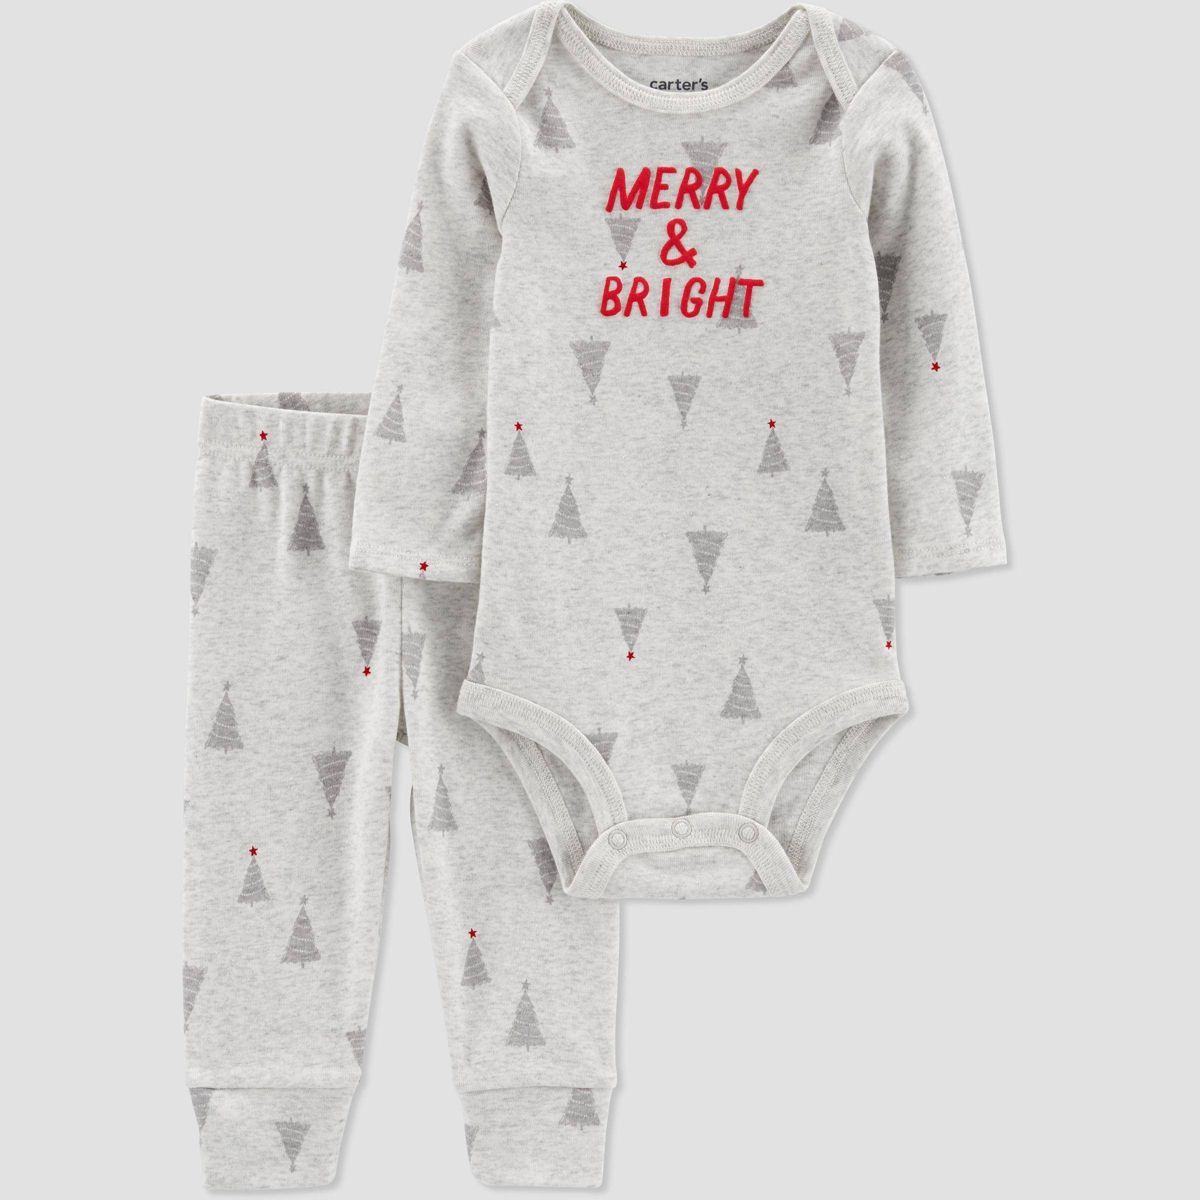 Carter's Just One You®️ 2pc Baby Merry and Bright Coordinate Set - Gray | Target